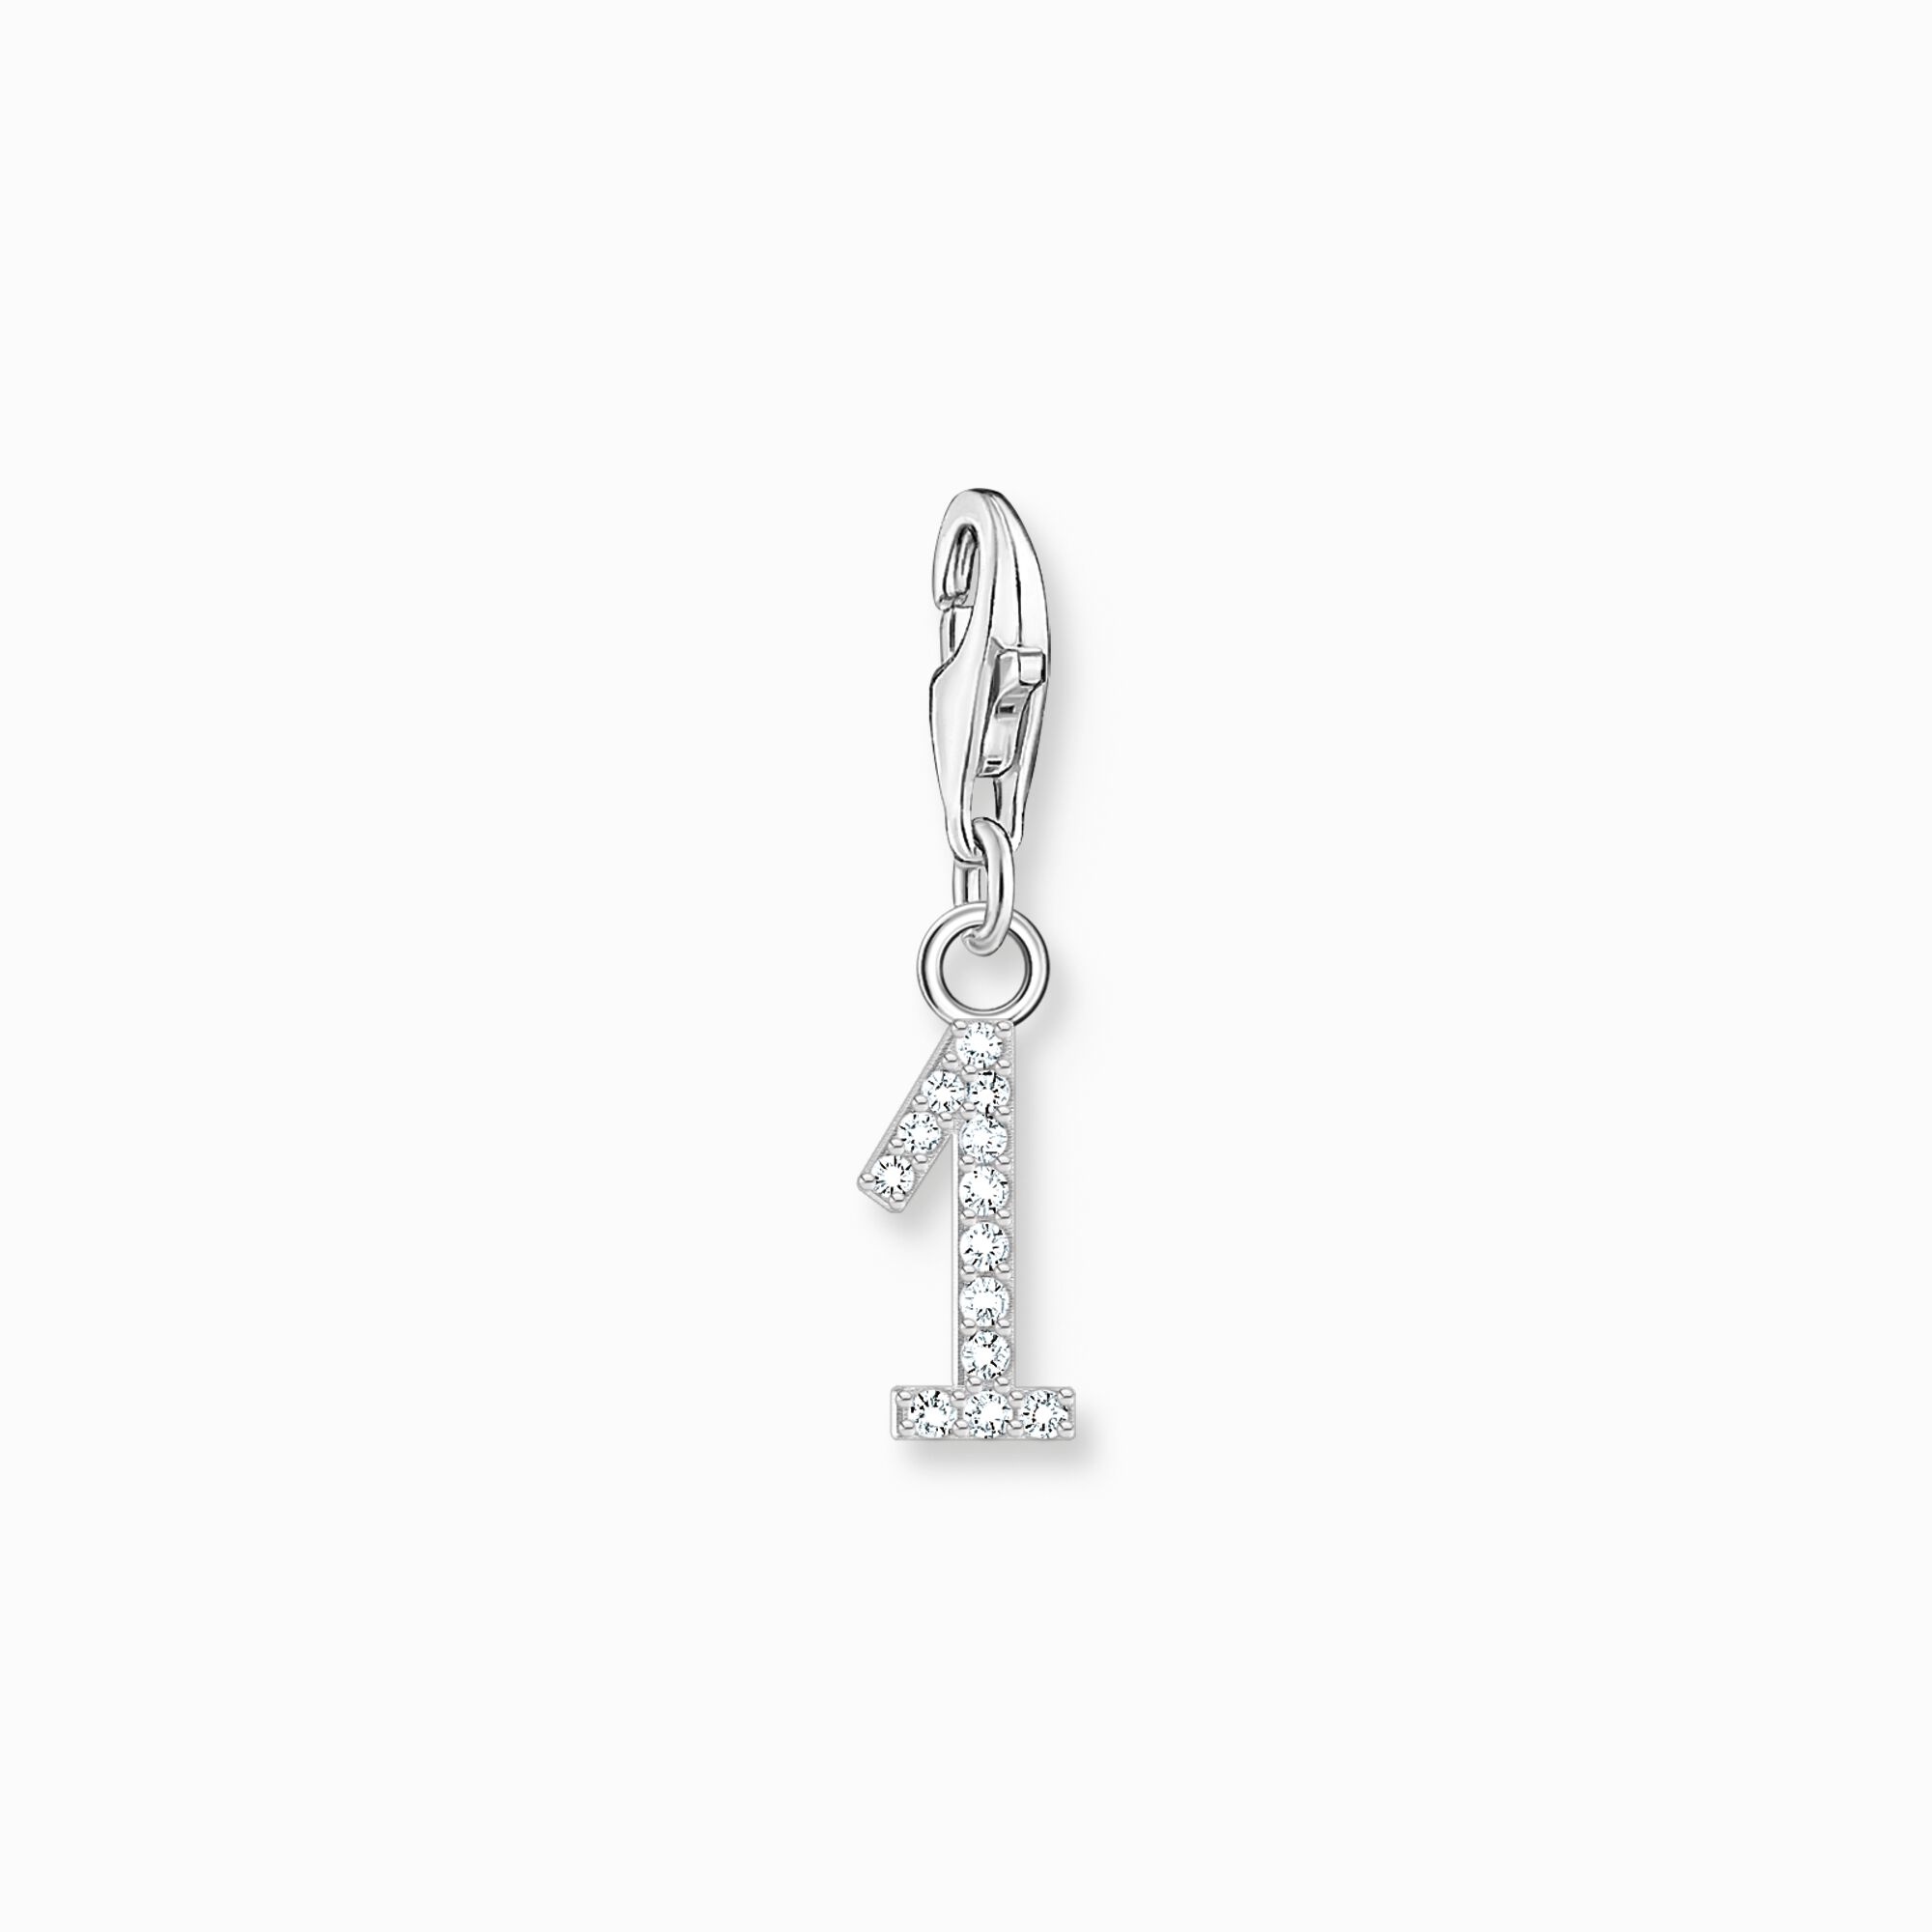 Silver charm pendant number 1 with zirconia from the Charm Club collection in the THOMAS SABO online store